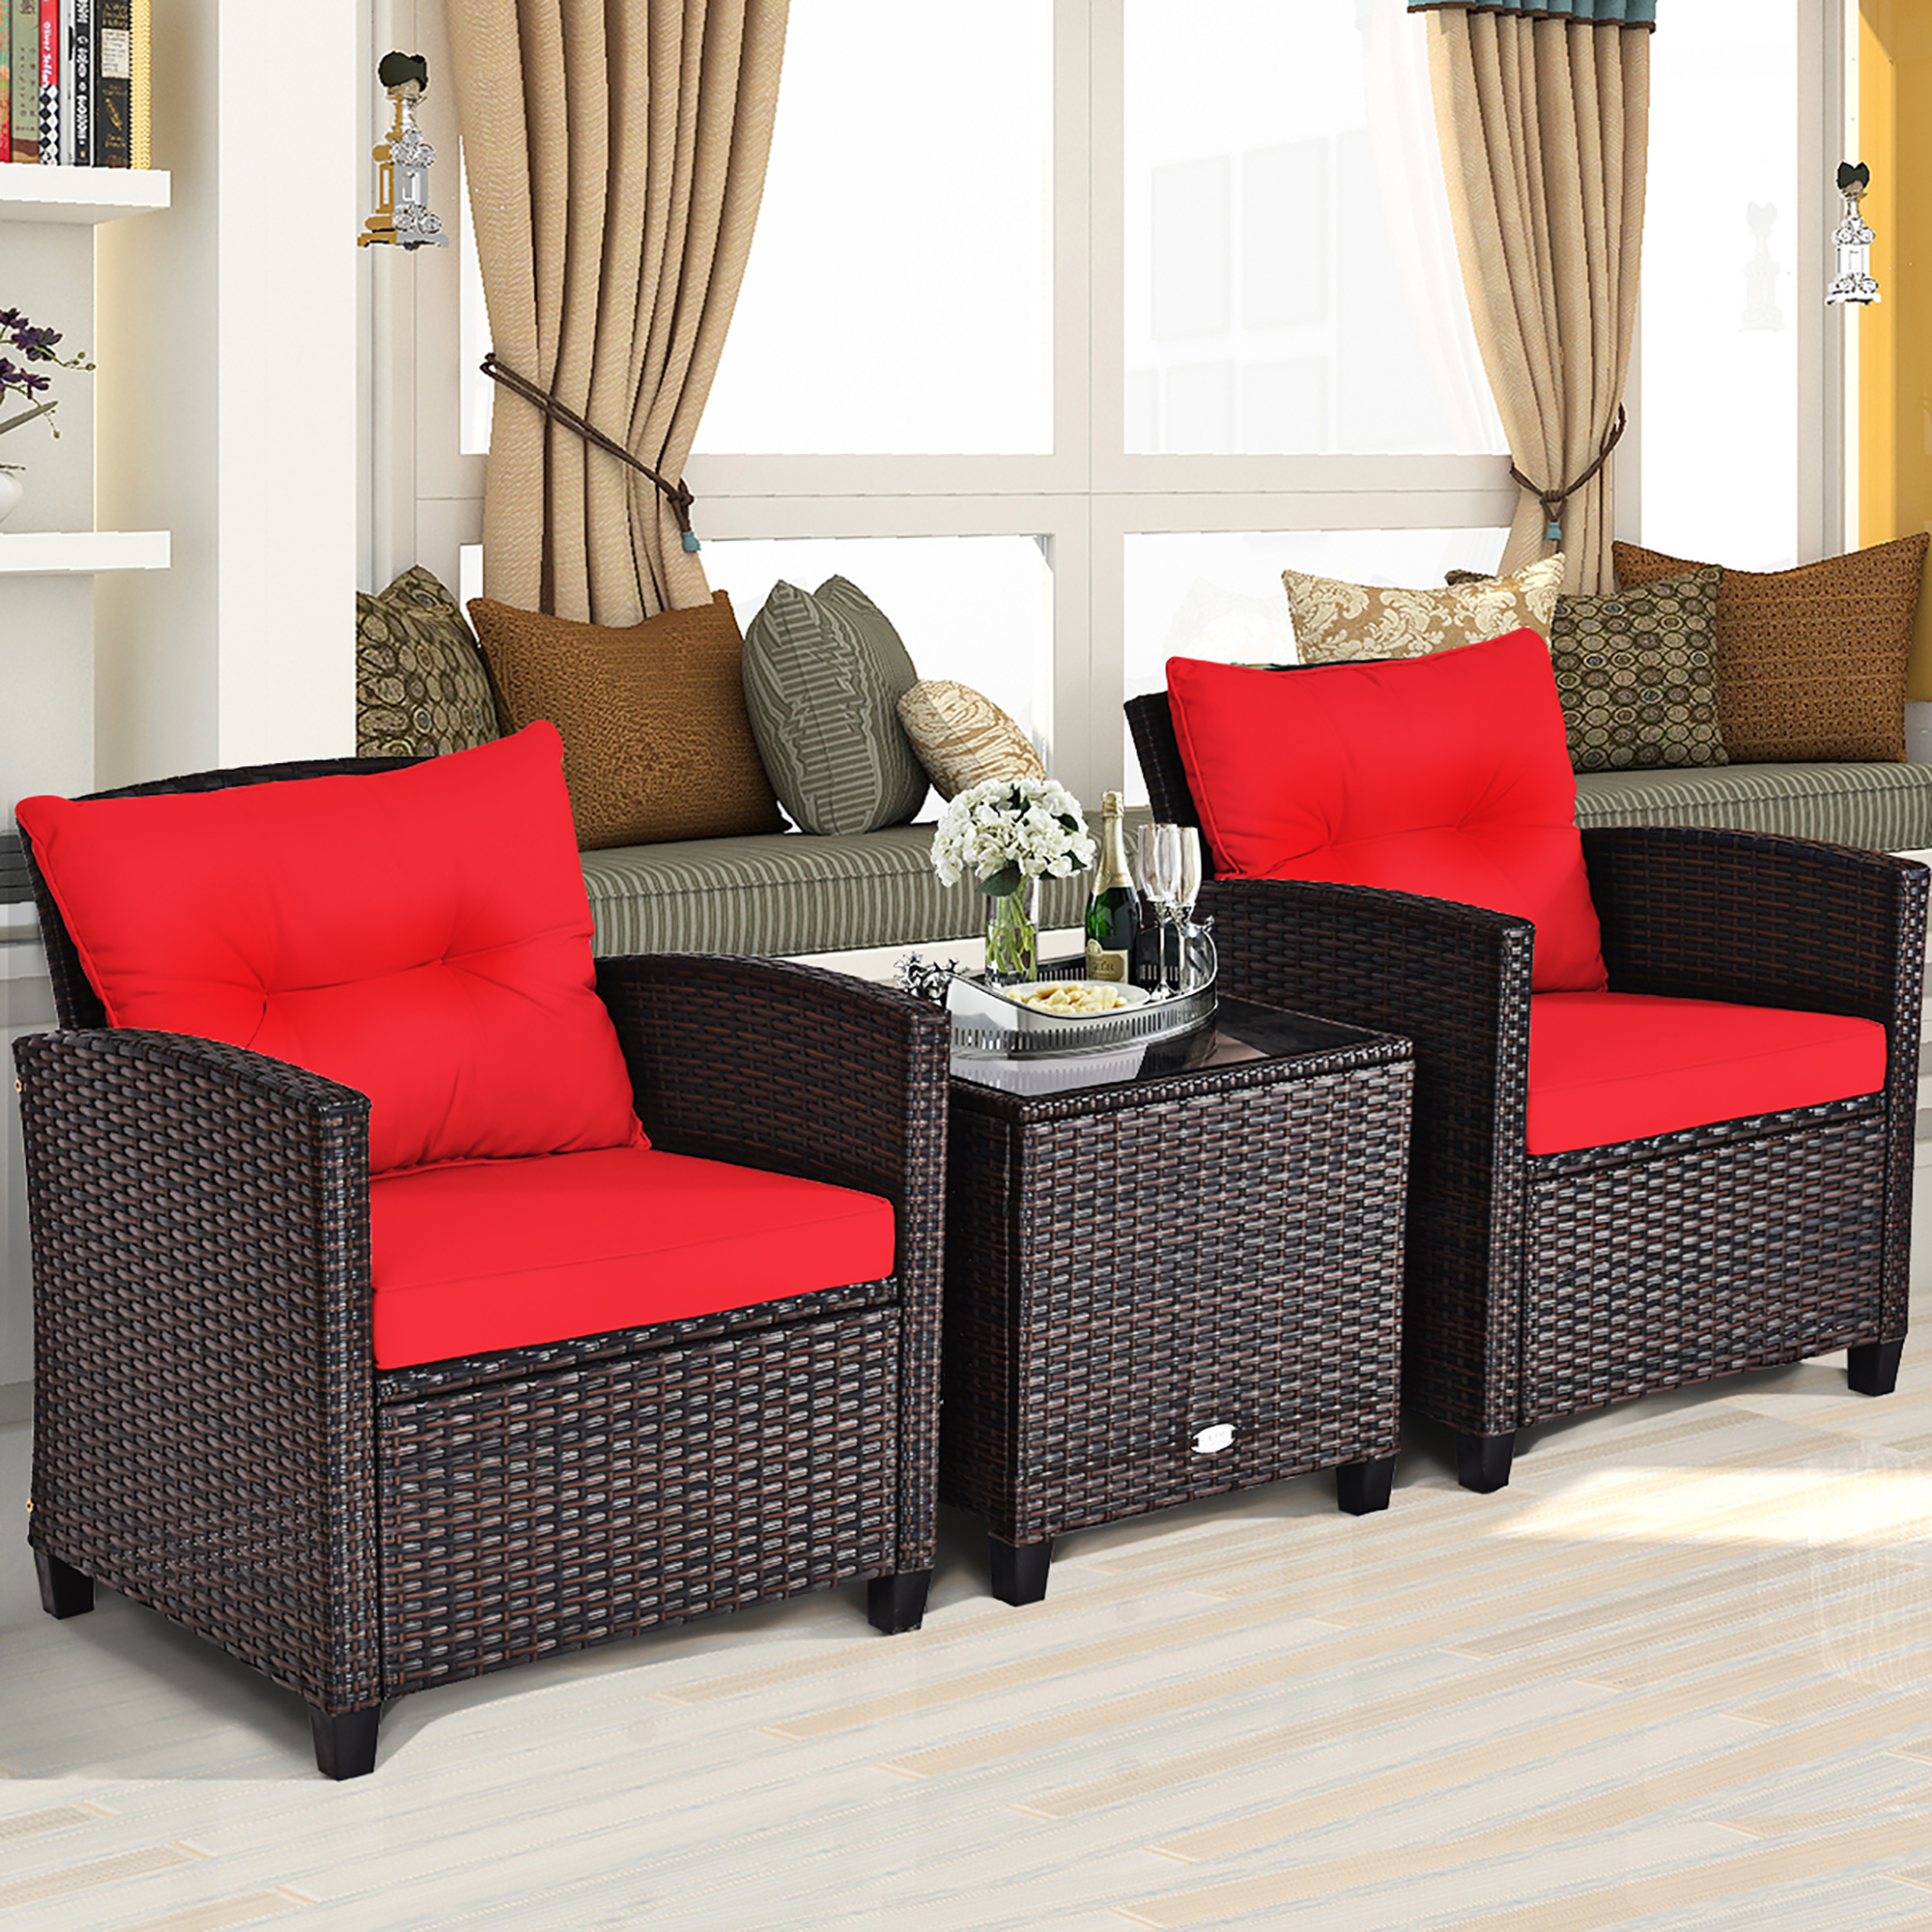 Costway 3PCS Patio Rattan Furniture Set Cushioned Conversation Set Sofa Coffee Table Red - image 5 of 10